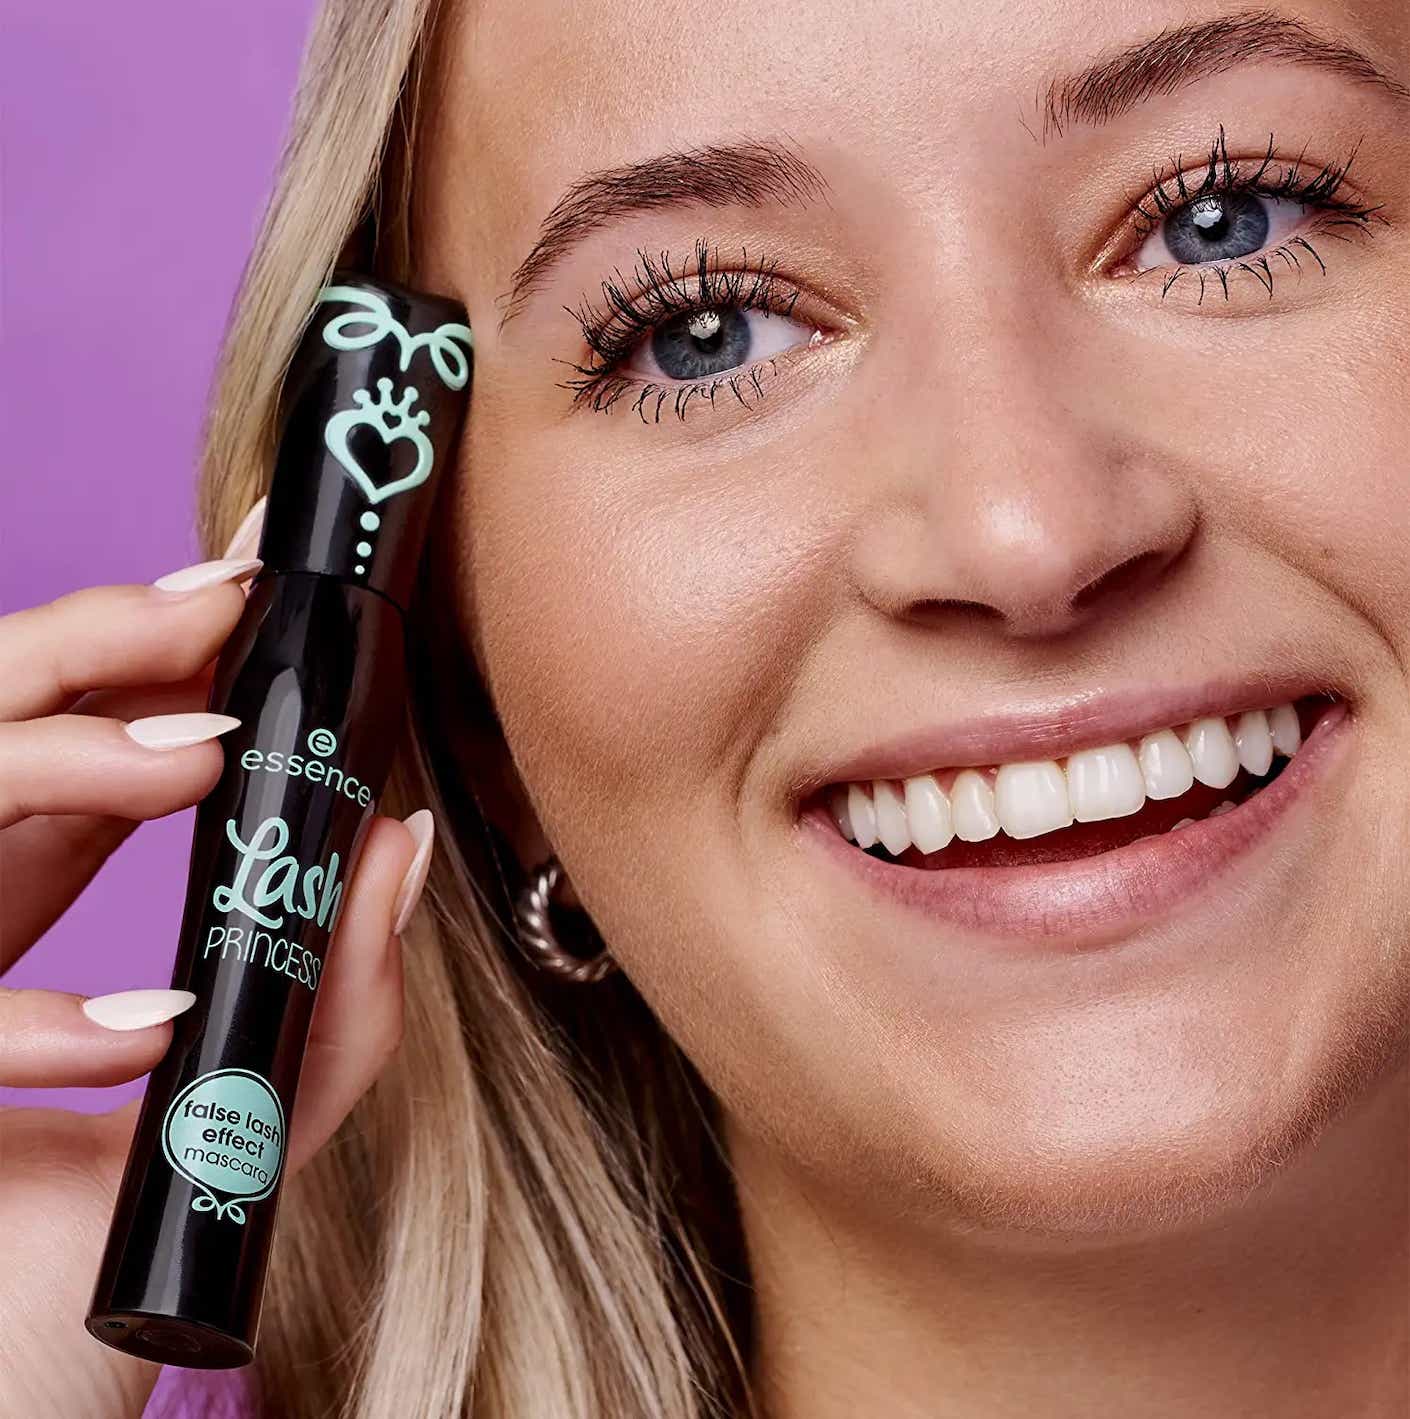 A smiling woman with long, black eyelashes holds a black tube of mascara up next to her face.